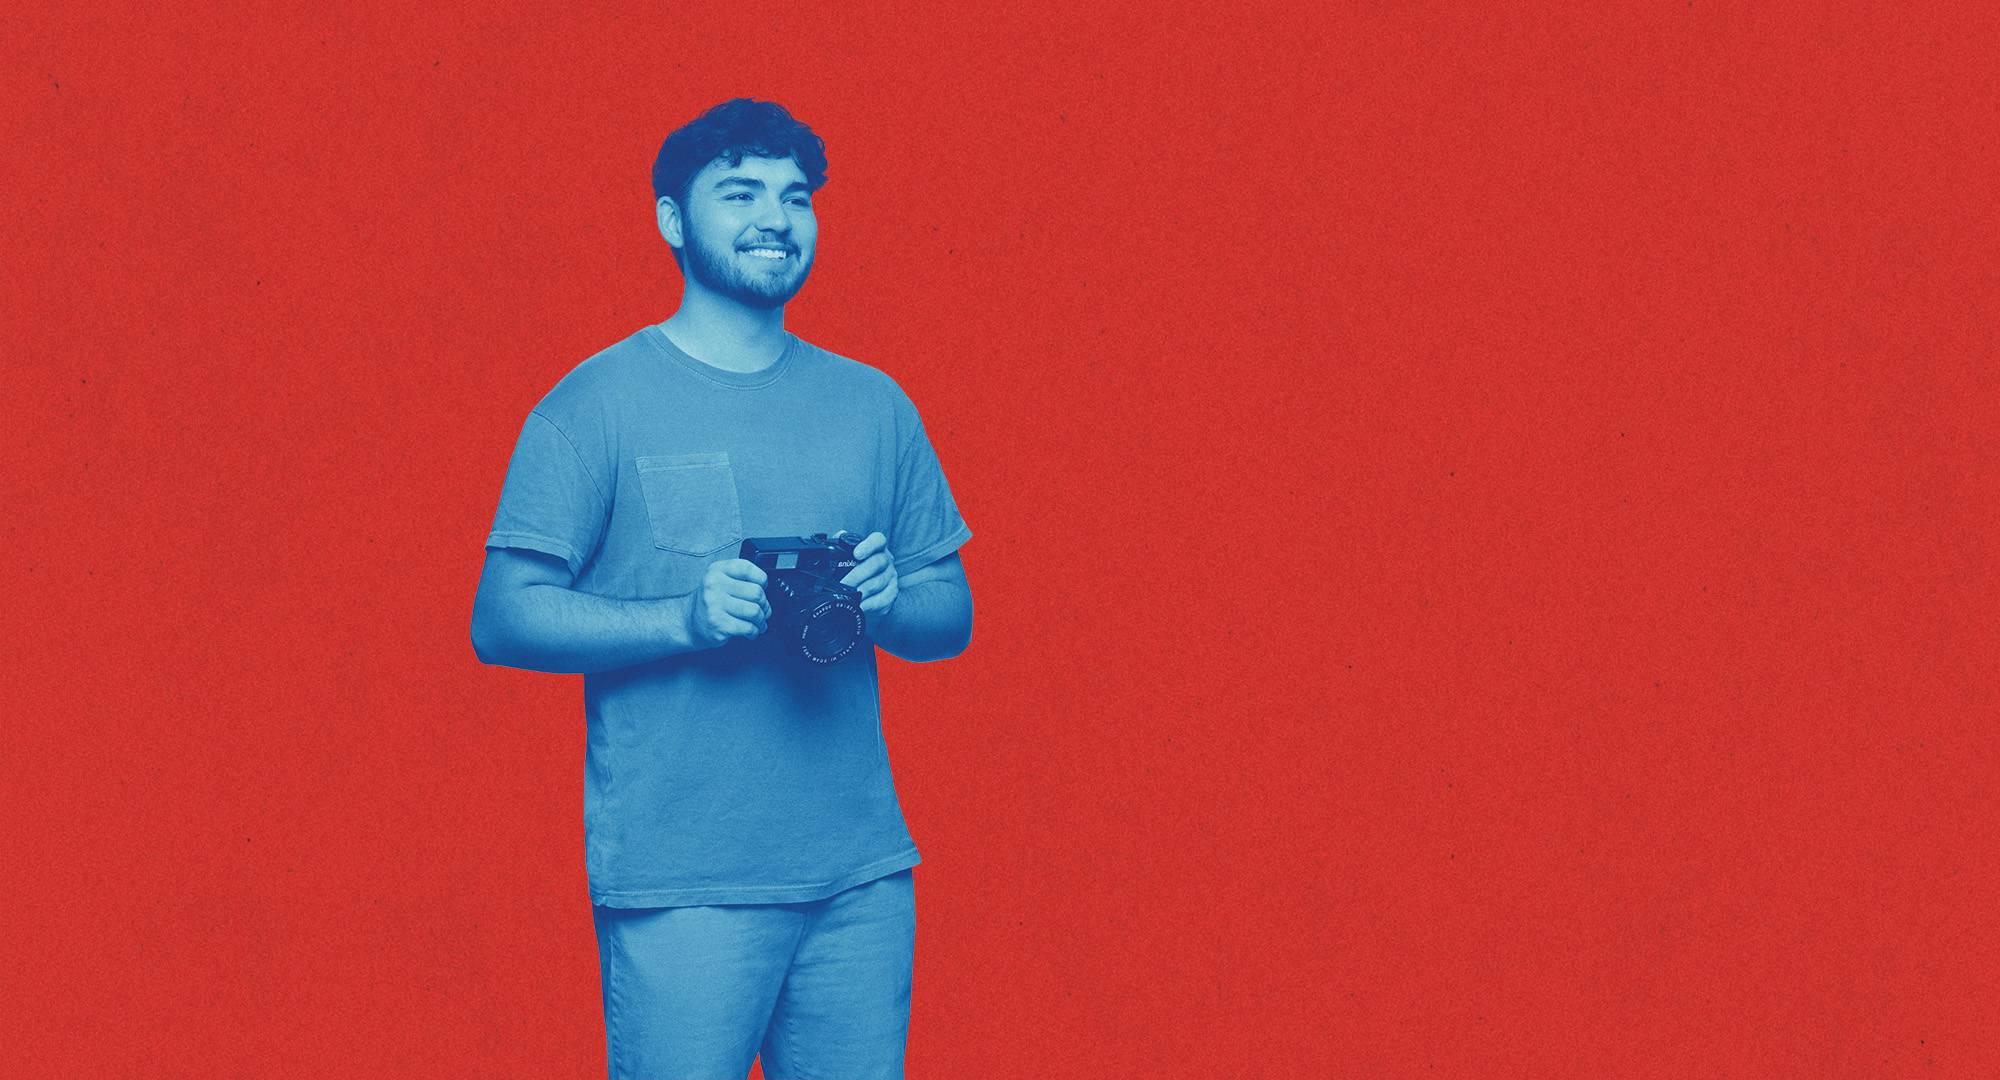 Student colored in blue filter standing in front of a red background.